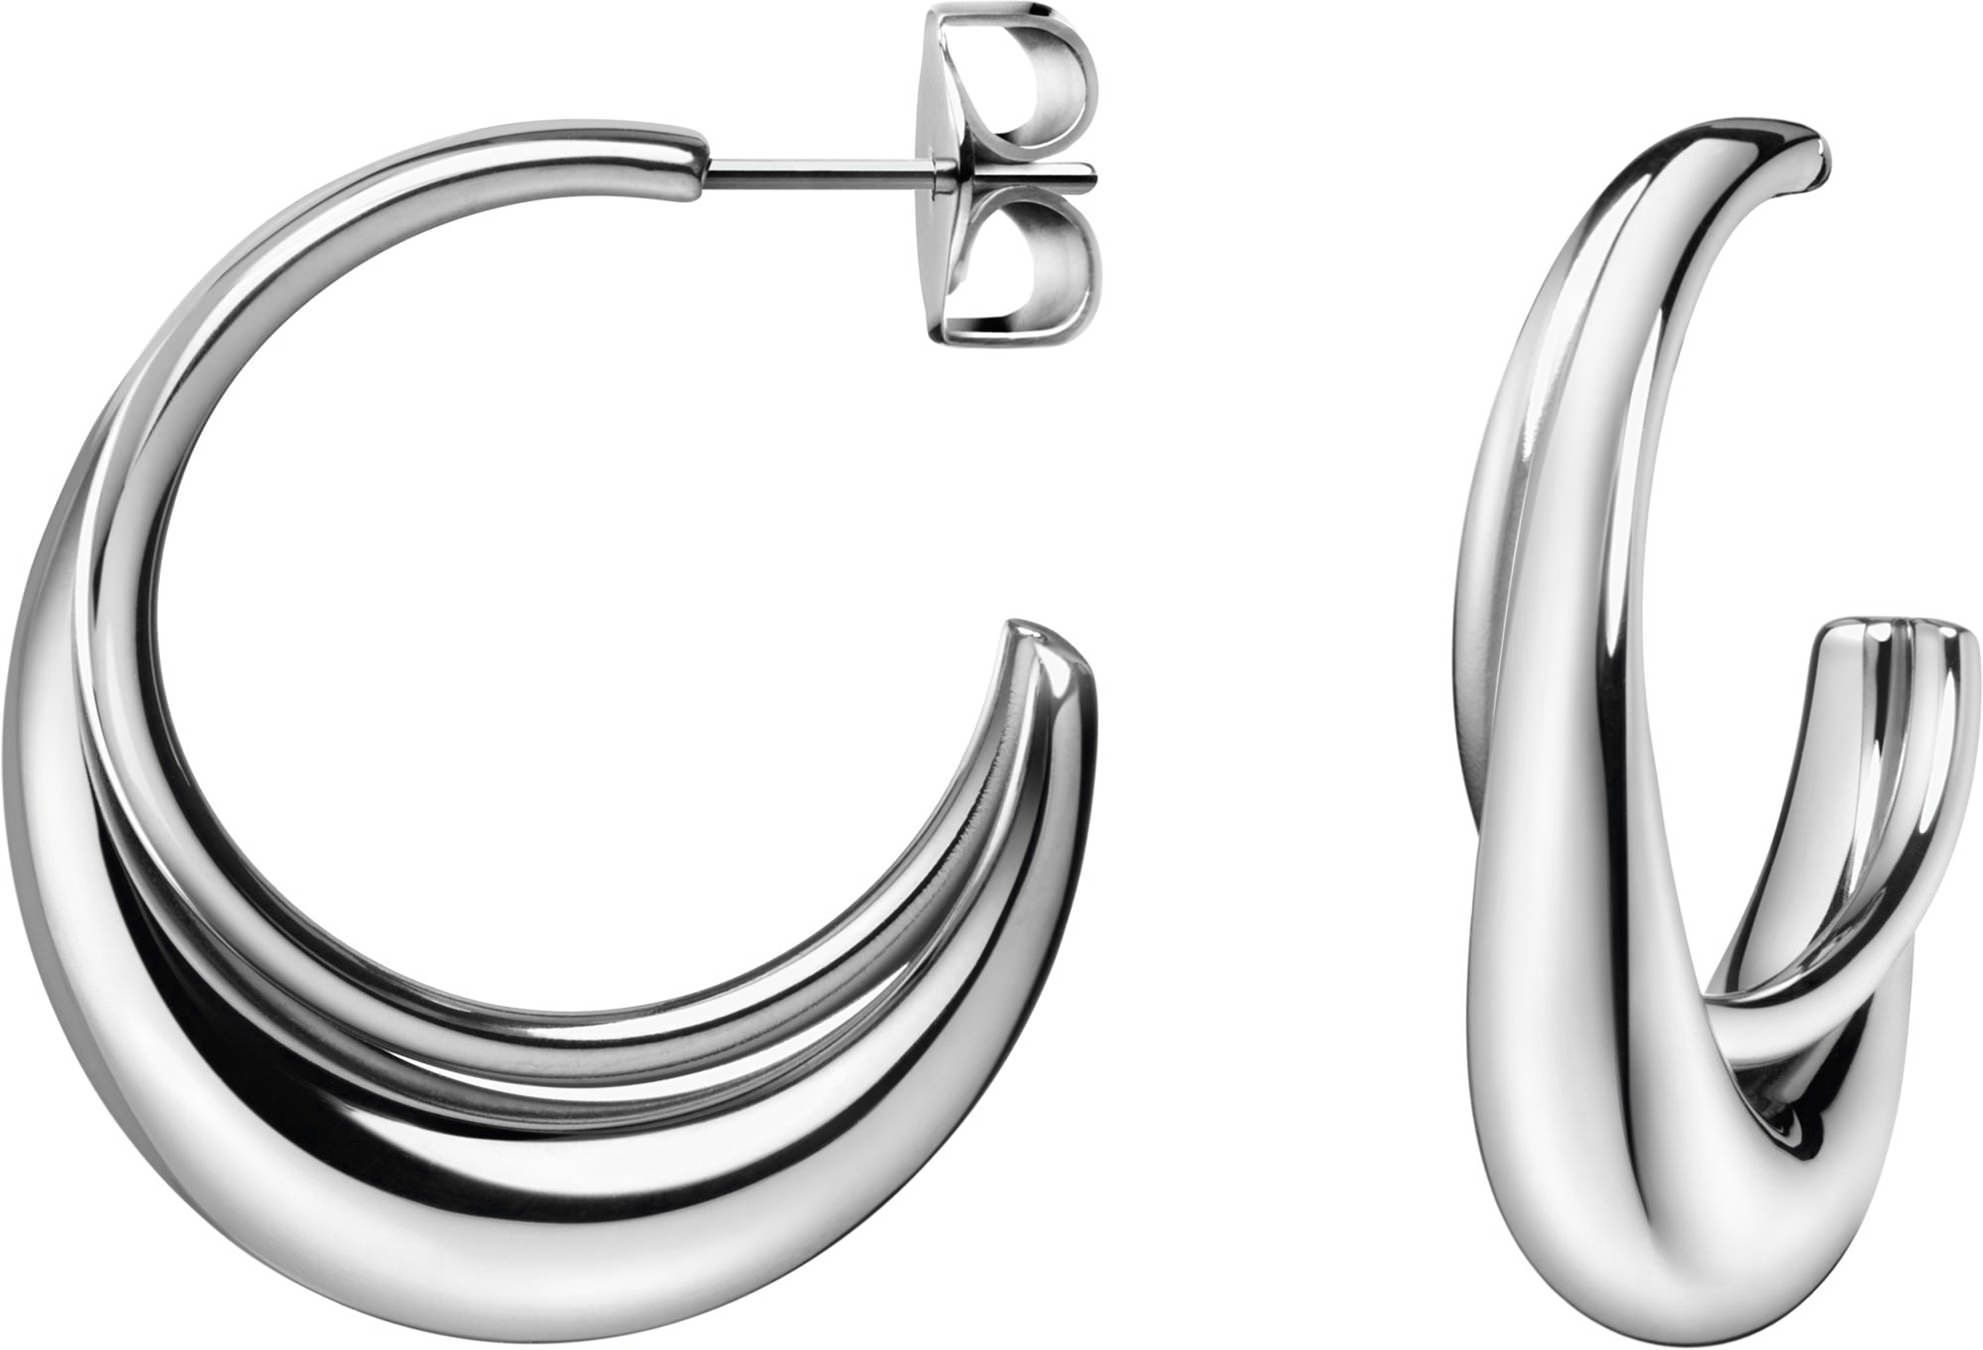 Calvin Klein SUB 300T Clive Cussler Earrings For Women - 1